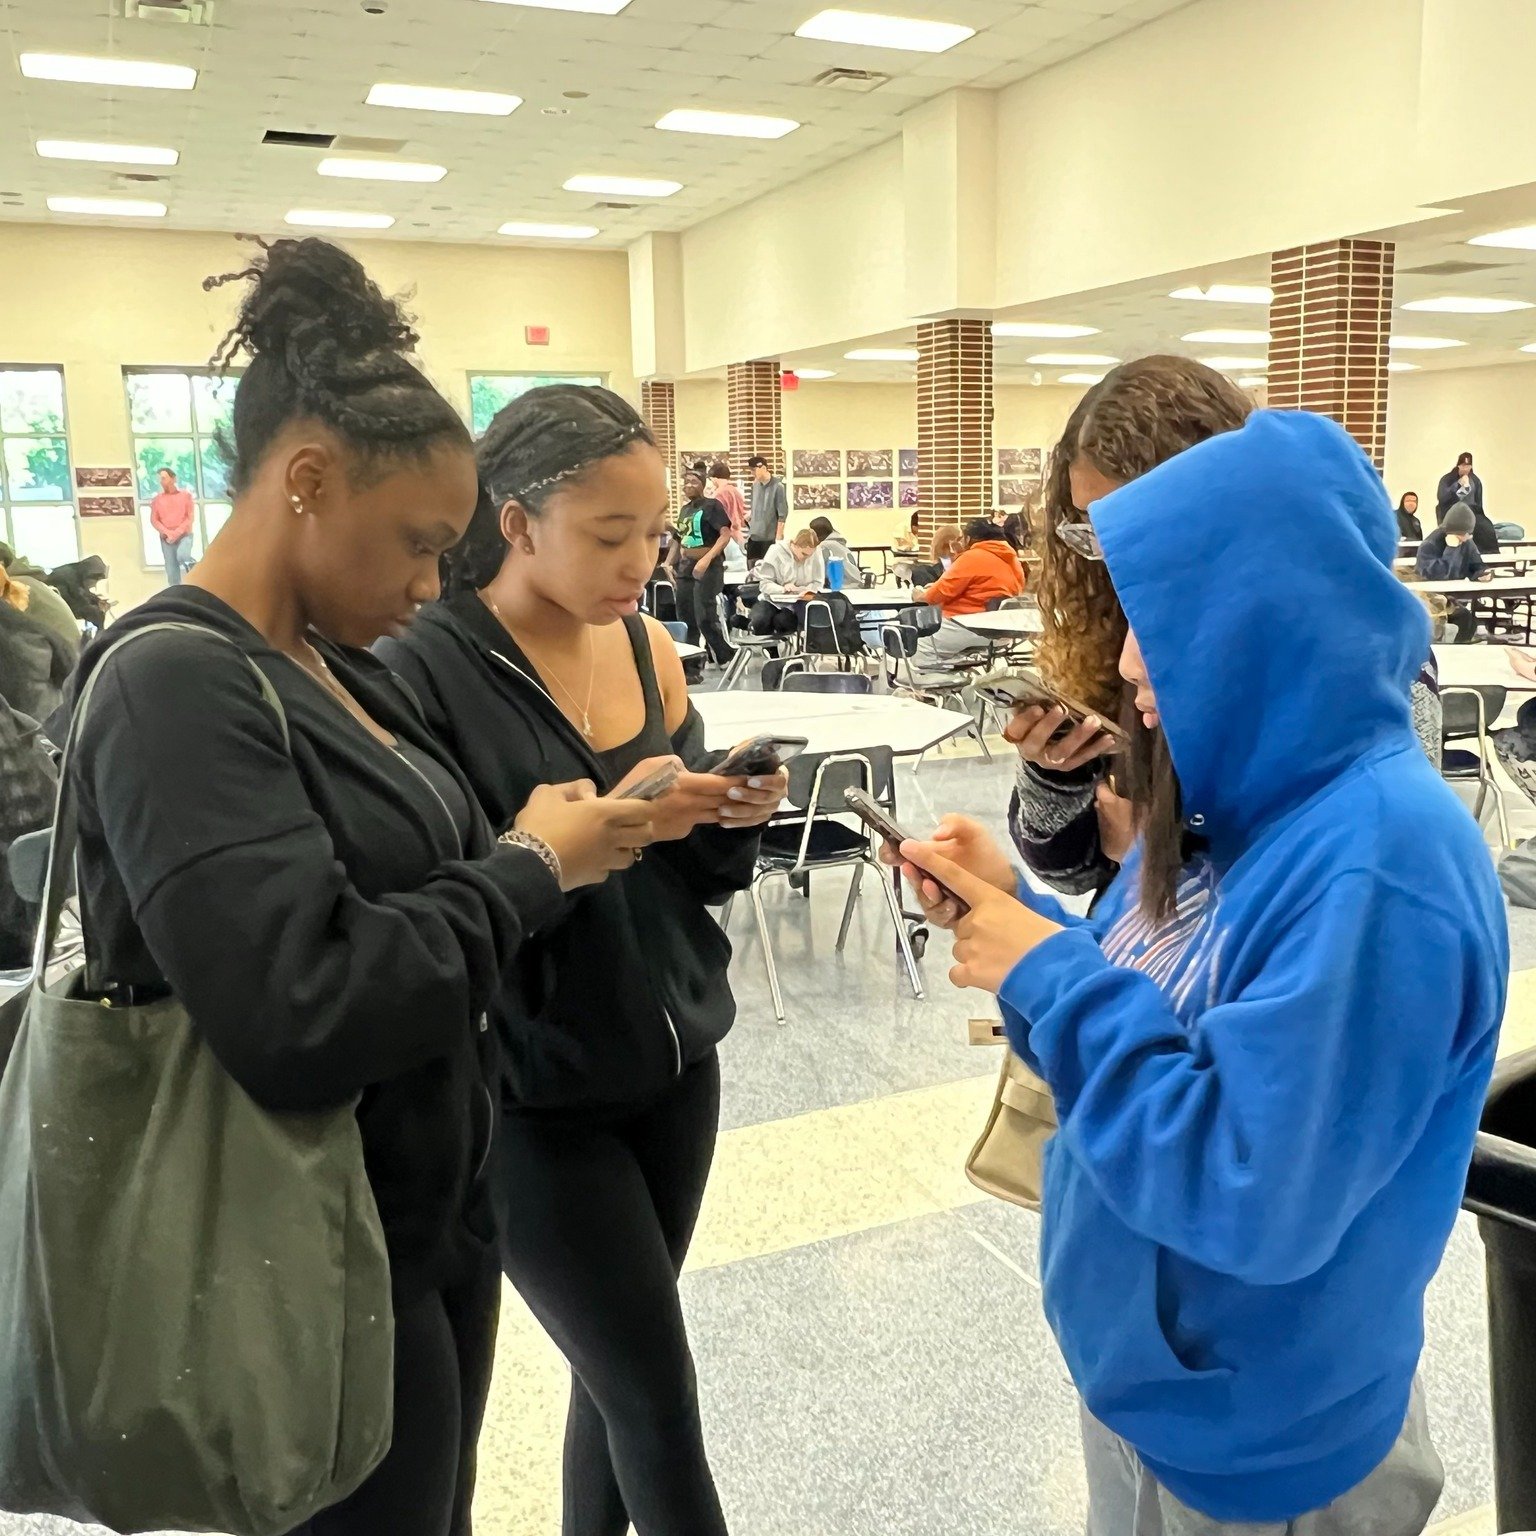 PA Youth Vote stopped by Pottstown Senior High School today to register voters and talk about the paid opportunities available.